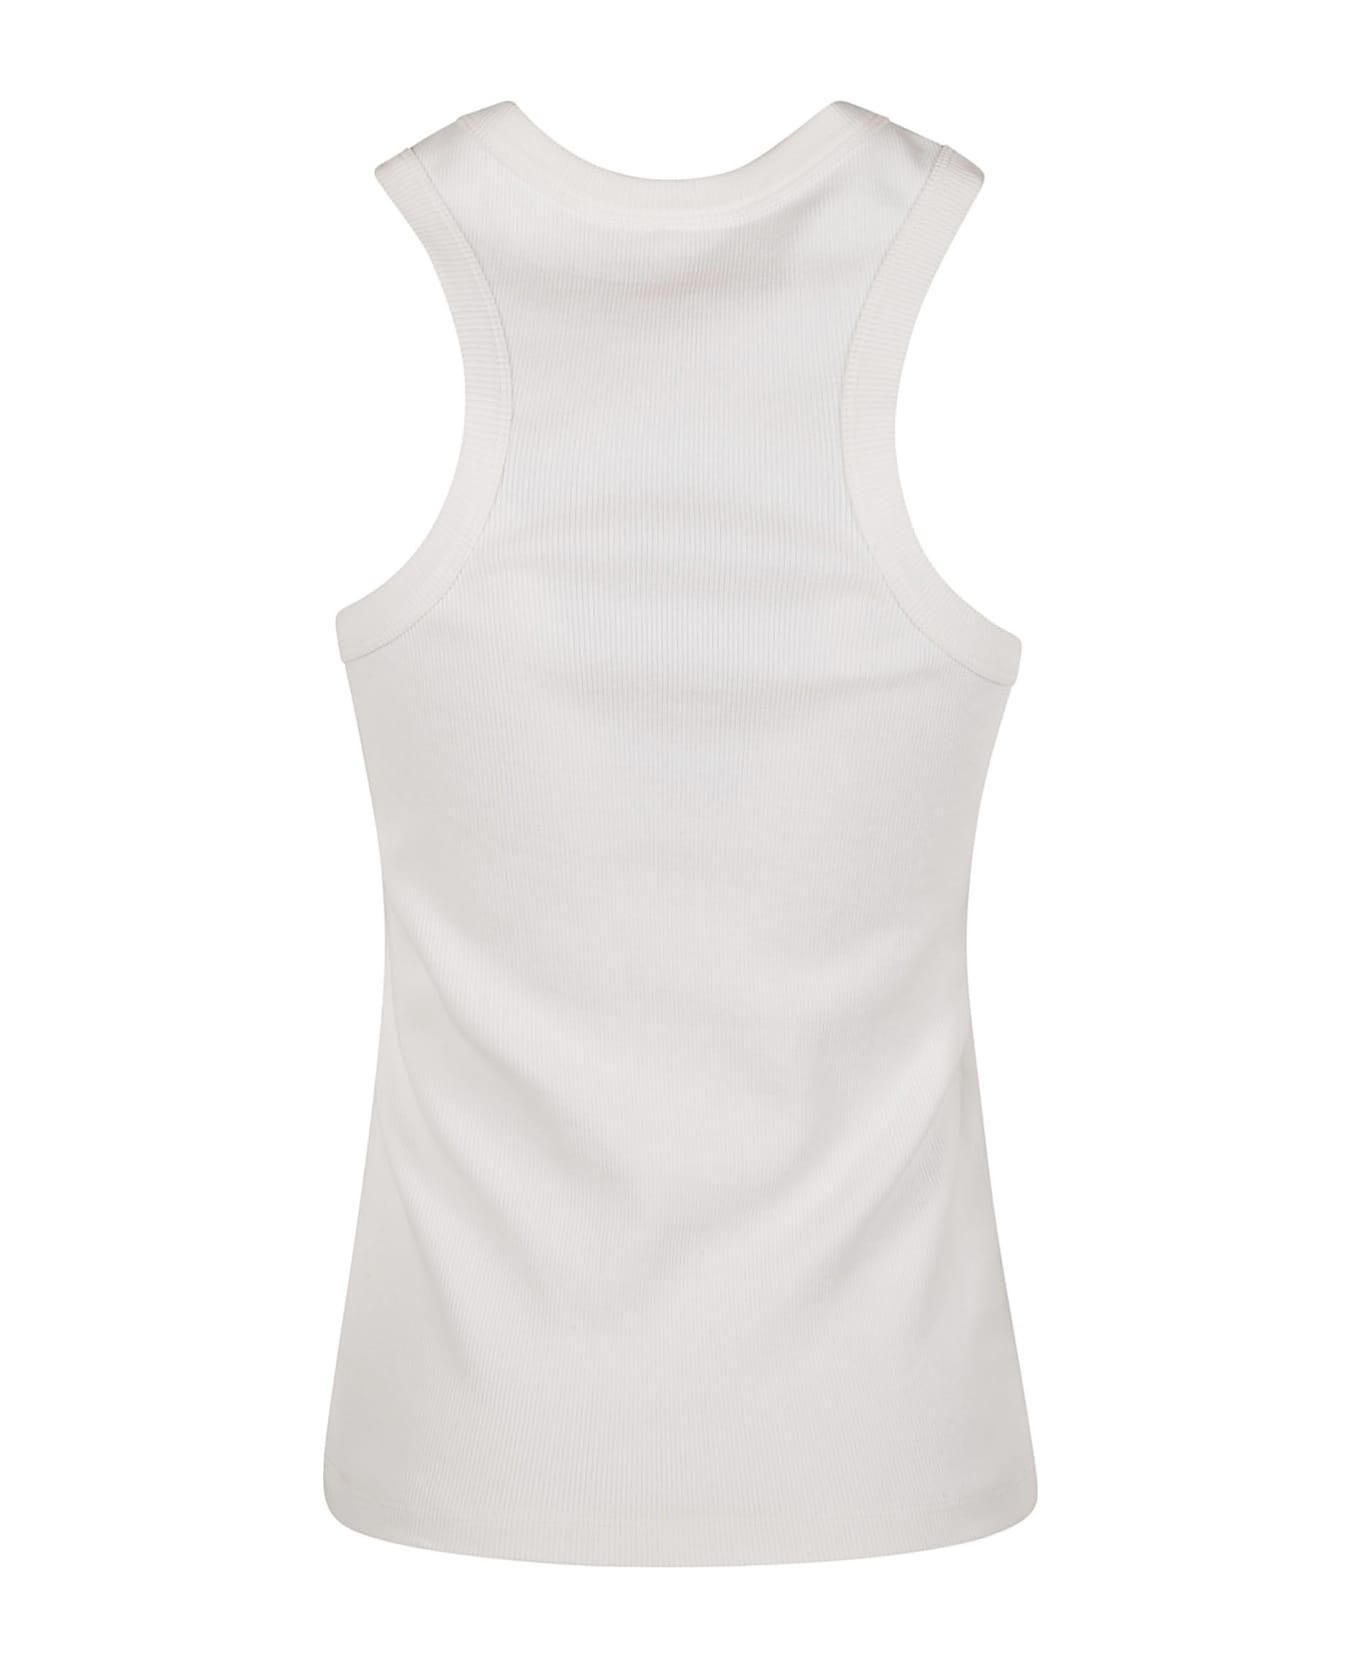 Ganni Floral Embellished Knit Tank Top - Bright White タンクトップ